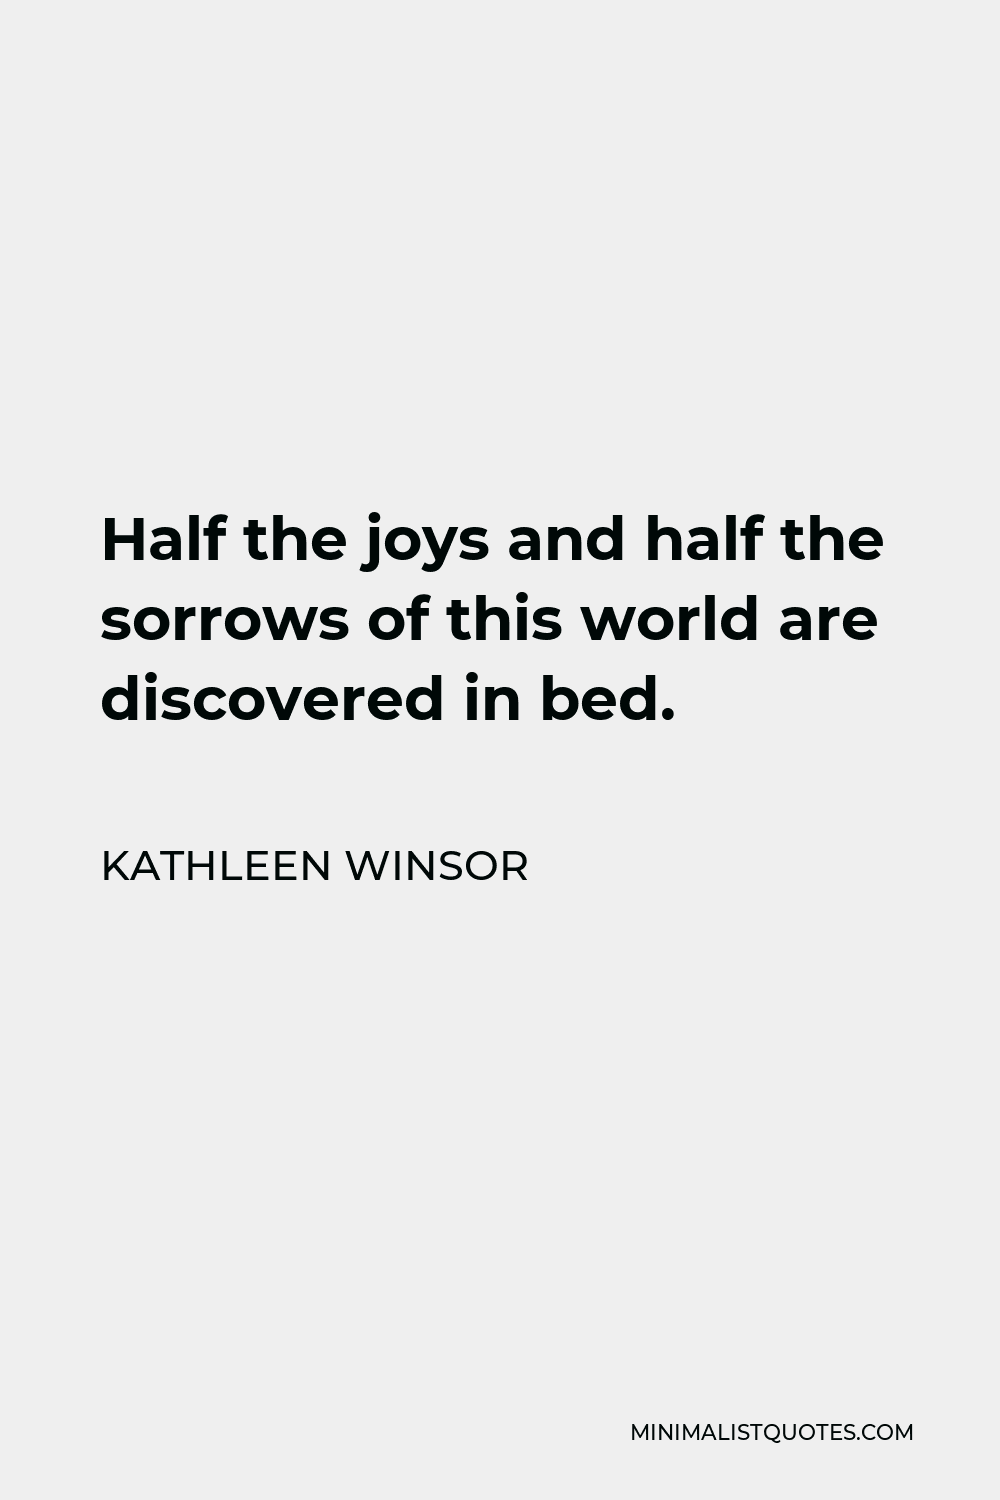 Kathleen Winsor Quote - Half the joys and half the sorrows of this world are discovered in bed.